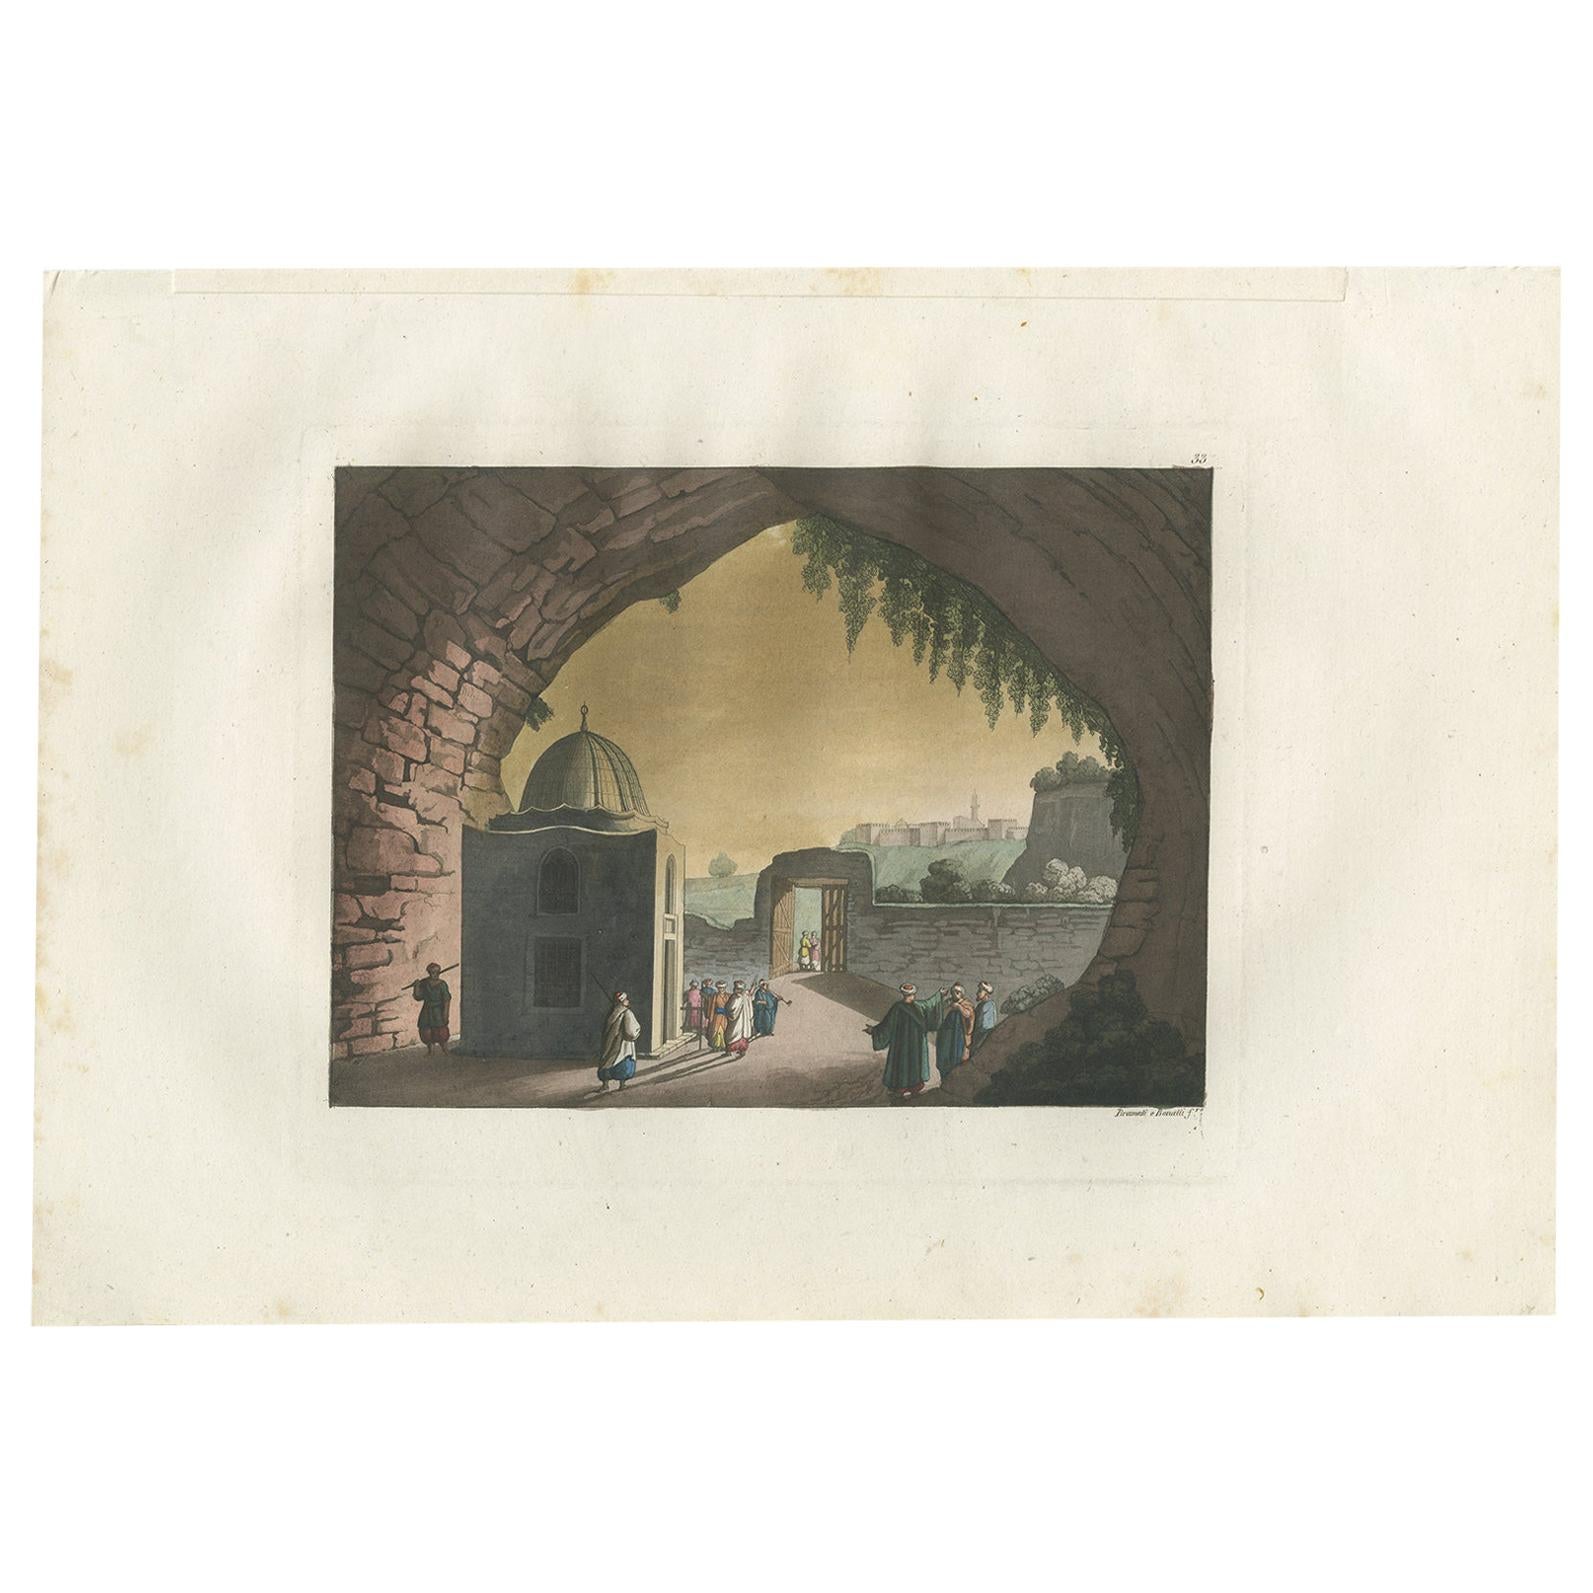 Antique Print of the Tomb of Jeremiah by Ferrario '1831'